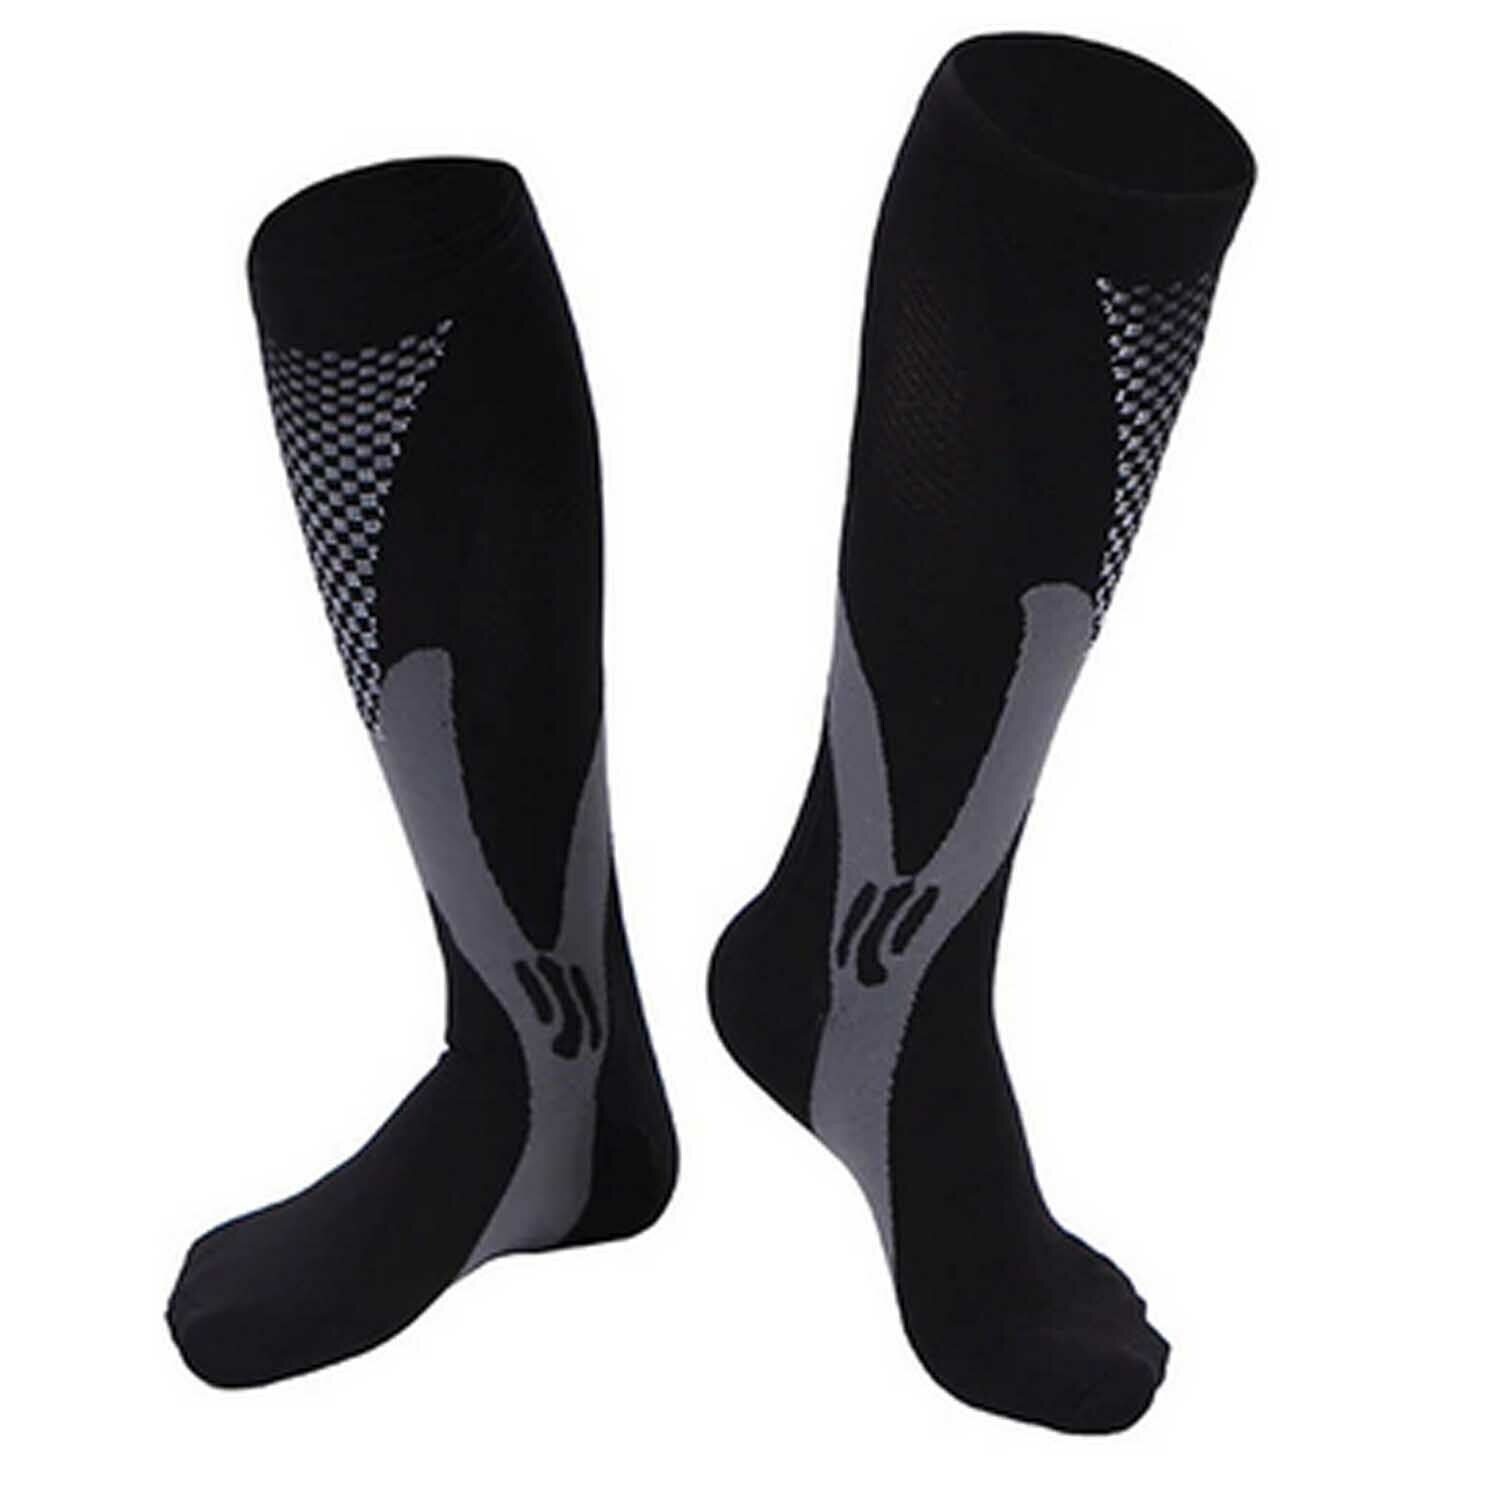 5Pairs Compression Socks 30-40 mmhg Knee High Running Sport Long Stockings Ankle